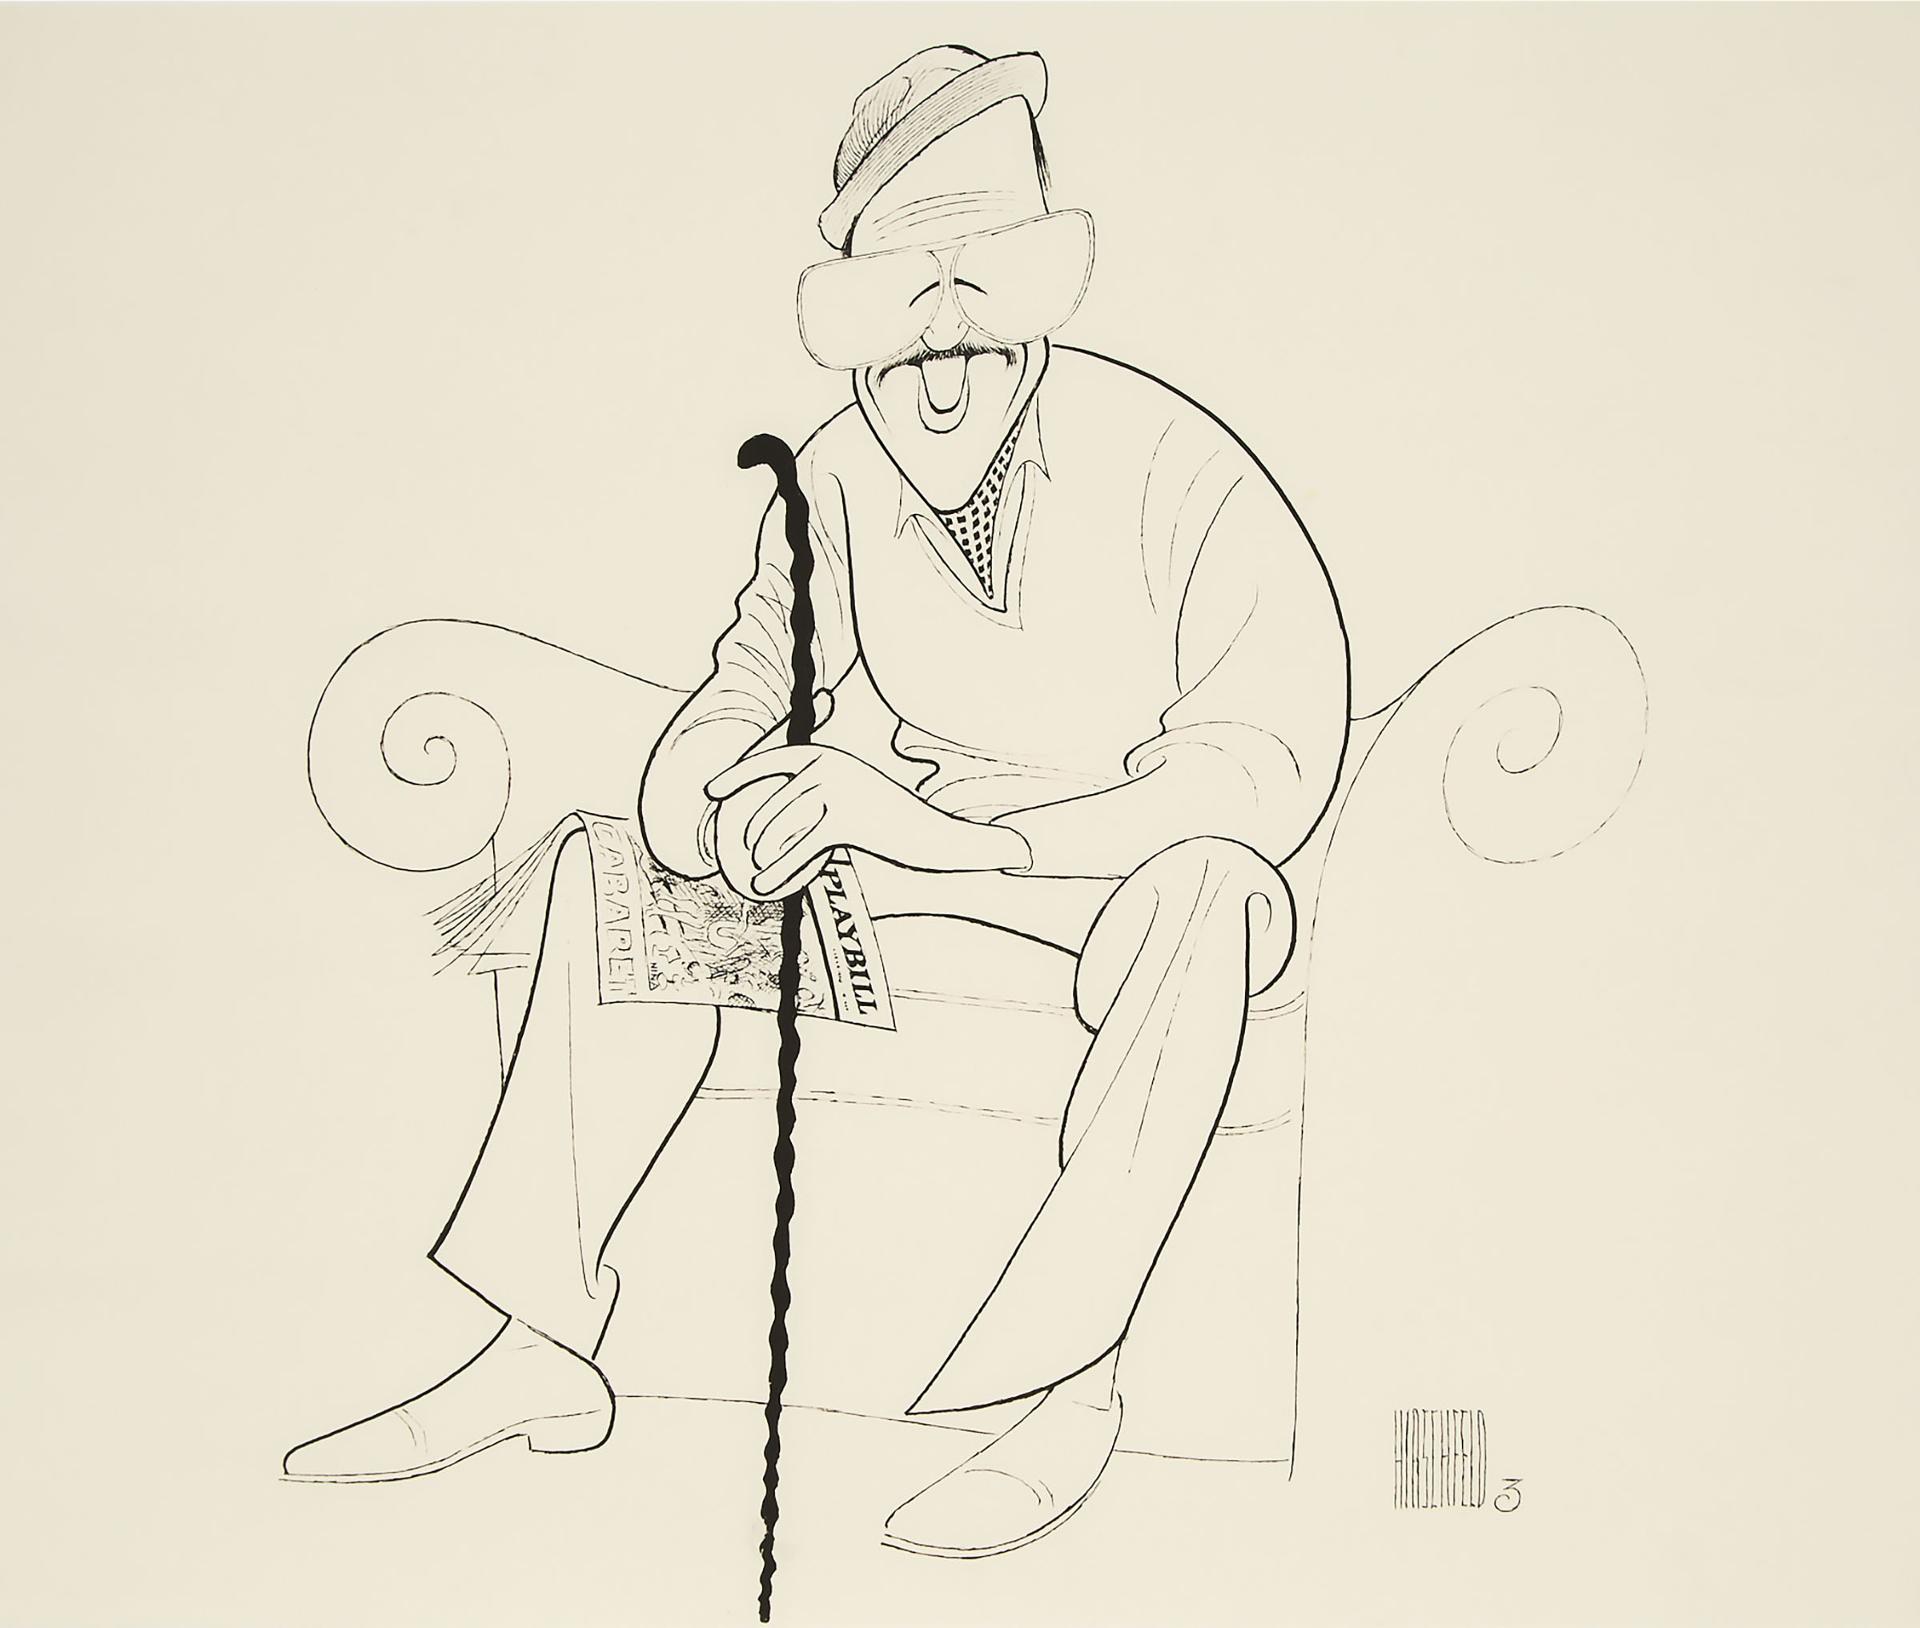 Albert (Al) Hirschfeld - Man With Moustache And Glasses Holding A Cane  While Reading A Copy Of  